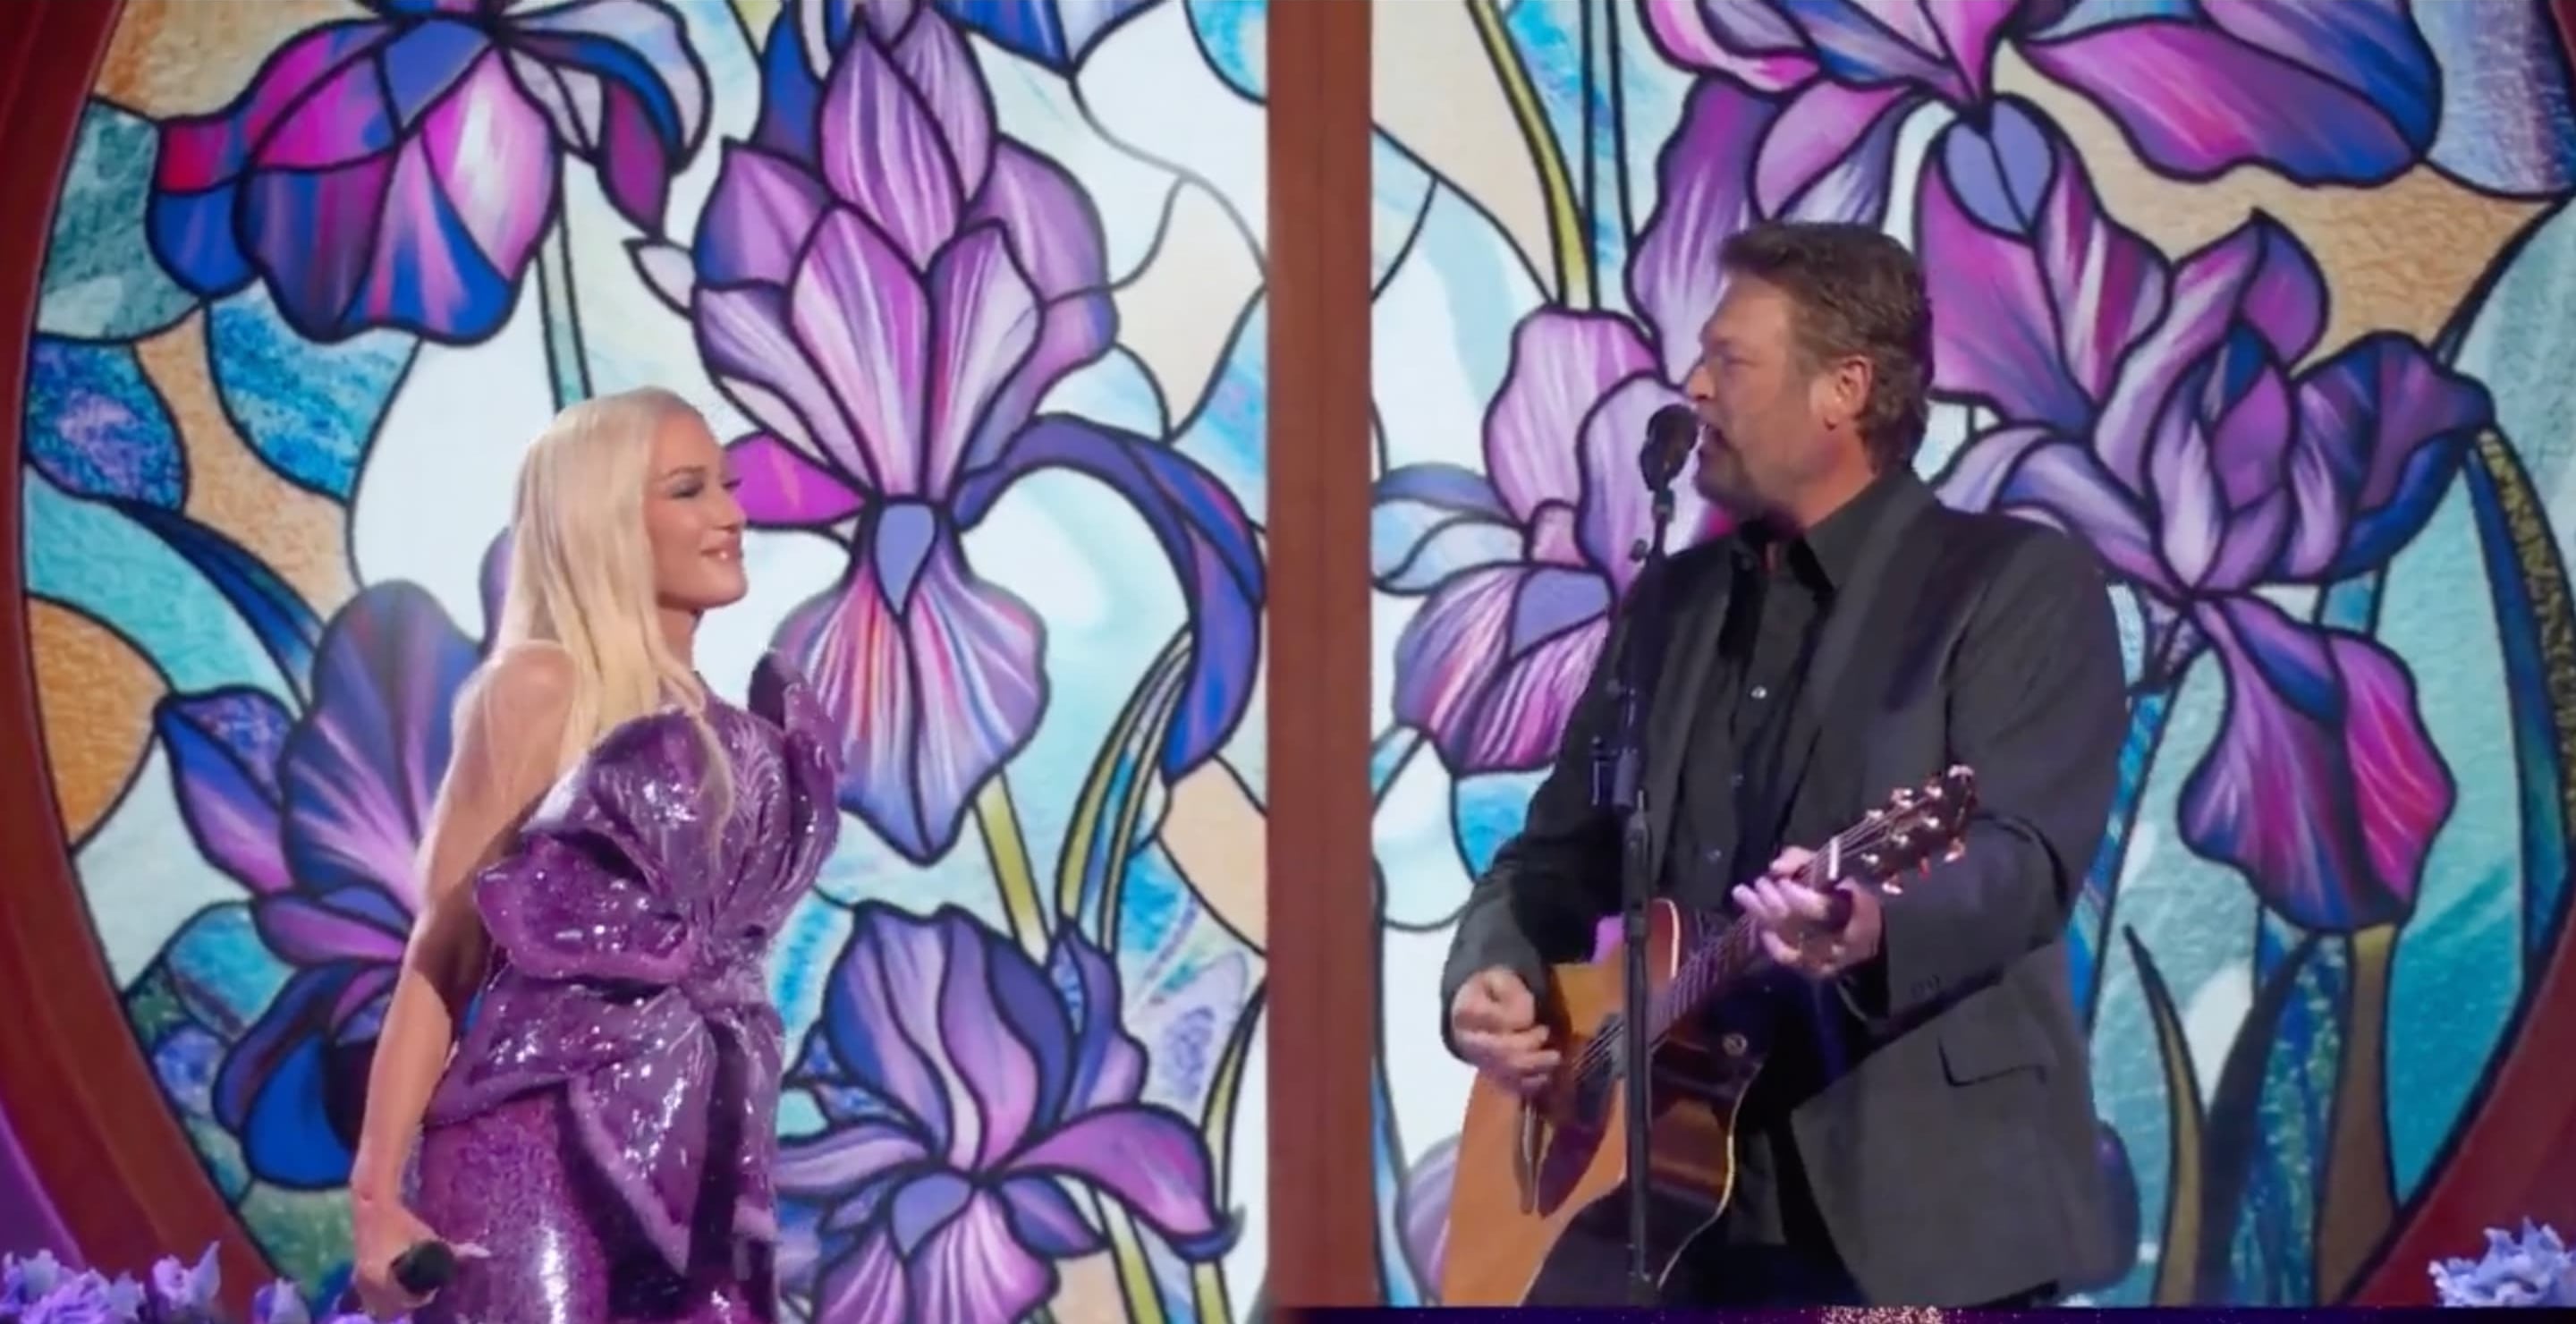 Blake Shelton and Gwen Stefani Are Sweet For Each Other in Purple Irises Performance